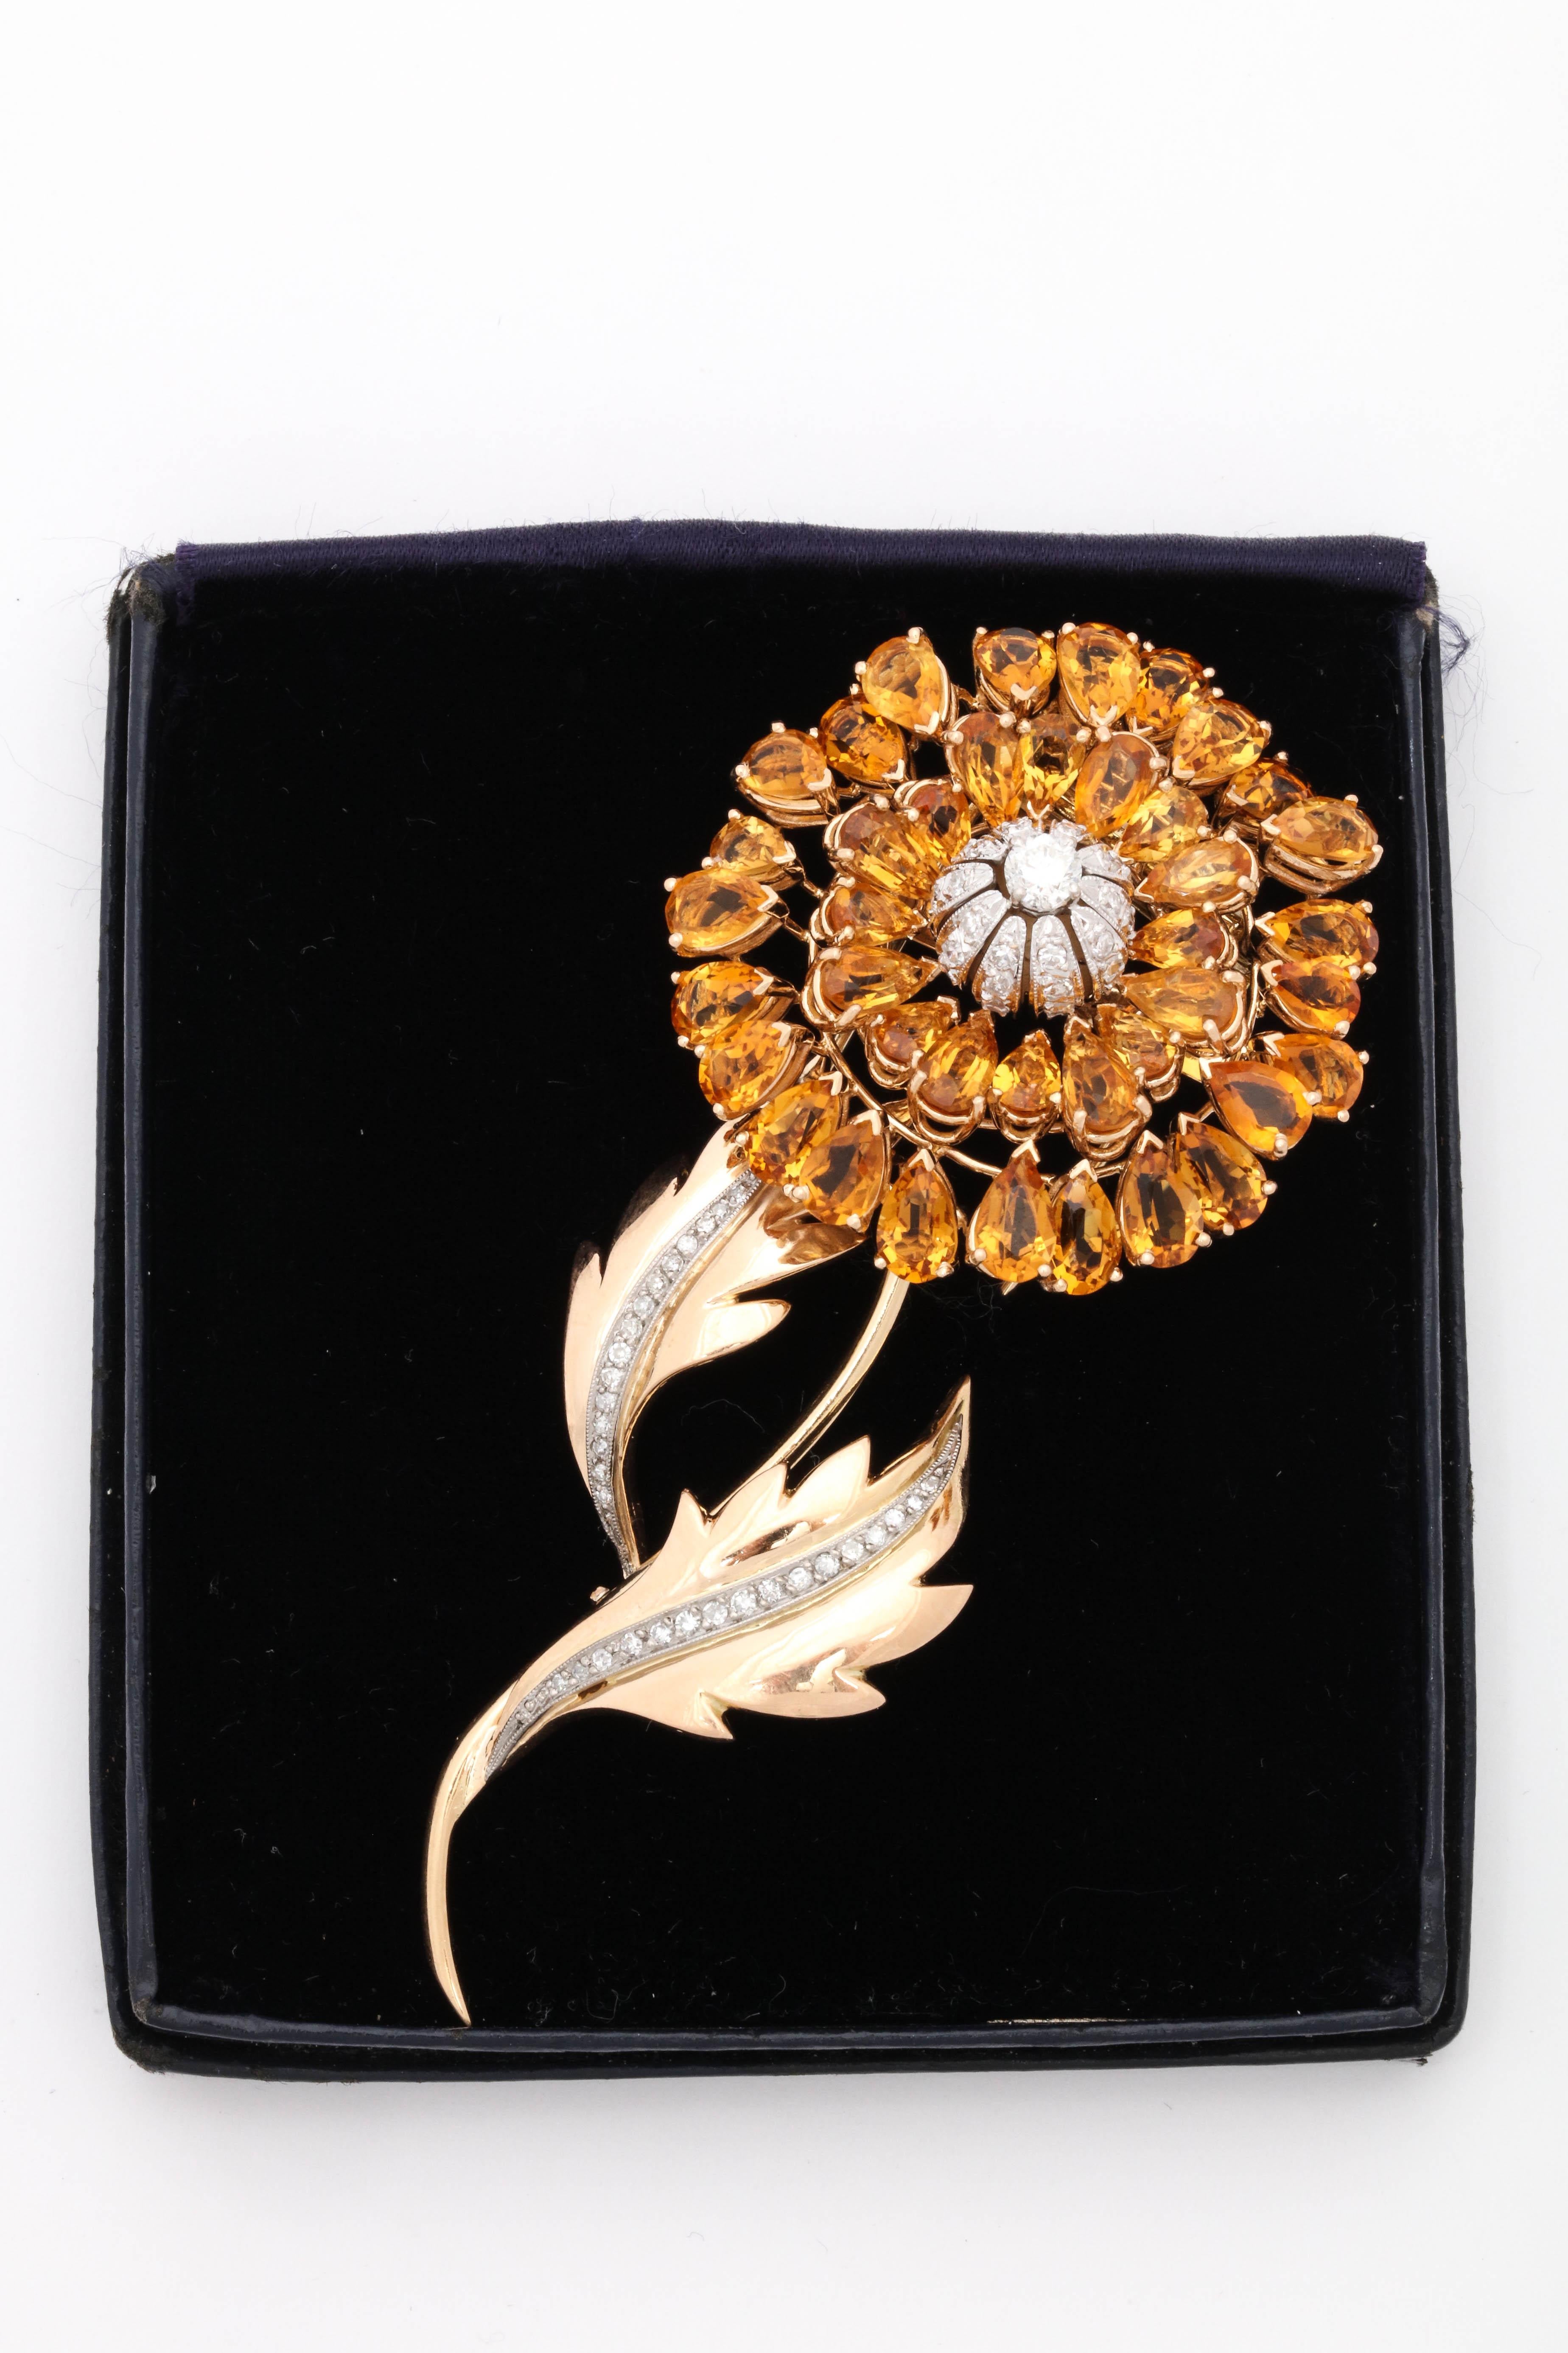 One 18kt Yellow Gold Figural Flower Brooch Embellished With Numerous Pear Shaped Beautiful Color Citrines Weighing Approximately 40 Carats. Further Designed With Numerous Full Cut Diamonds Weighing Approximately 2 Carats Total Weight. Approximate